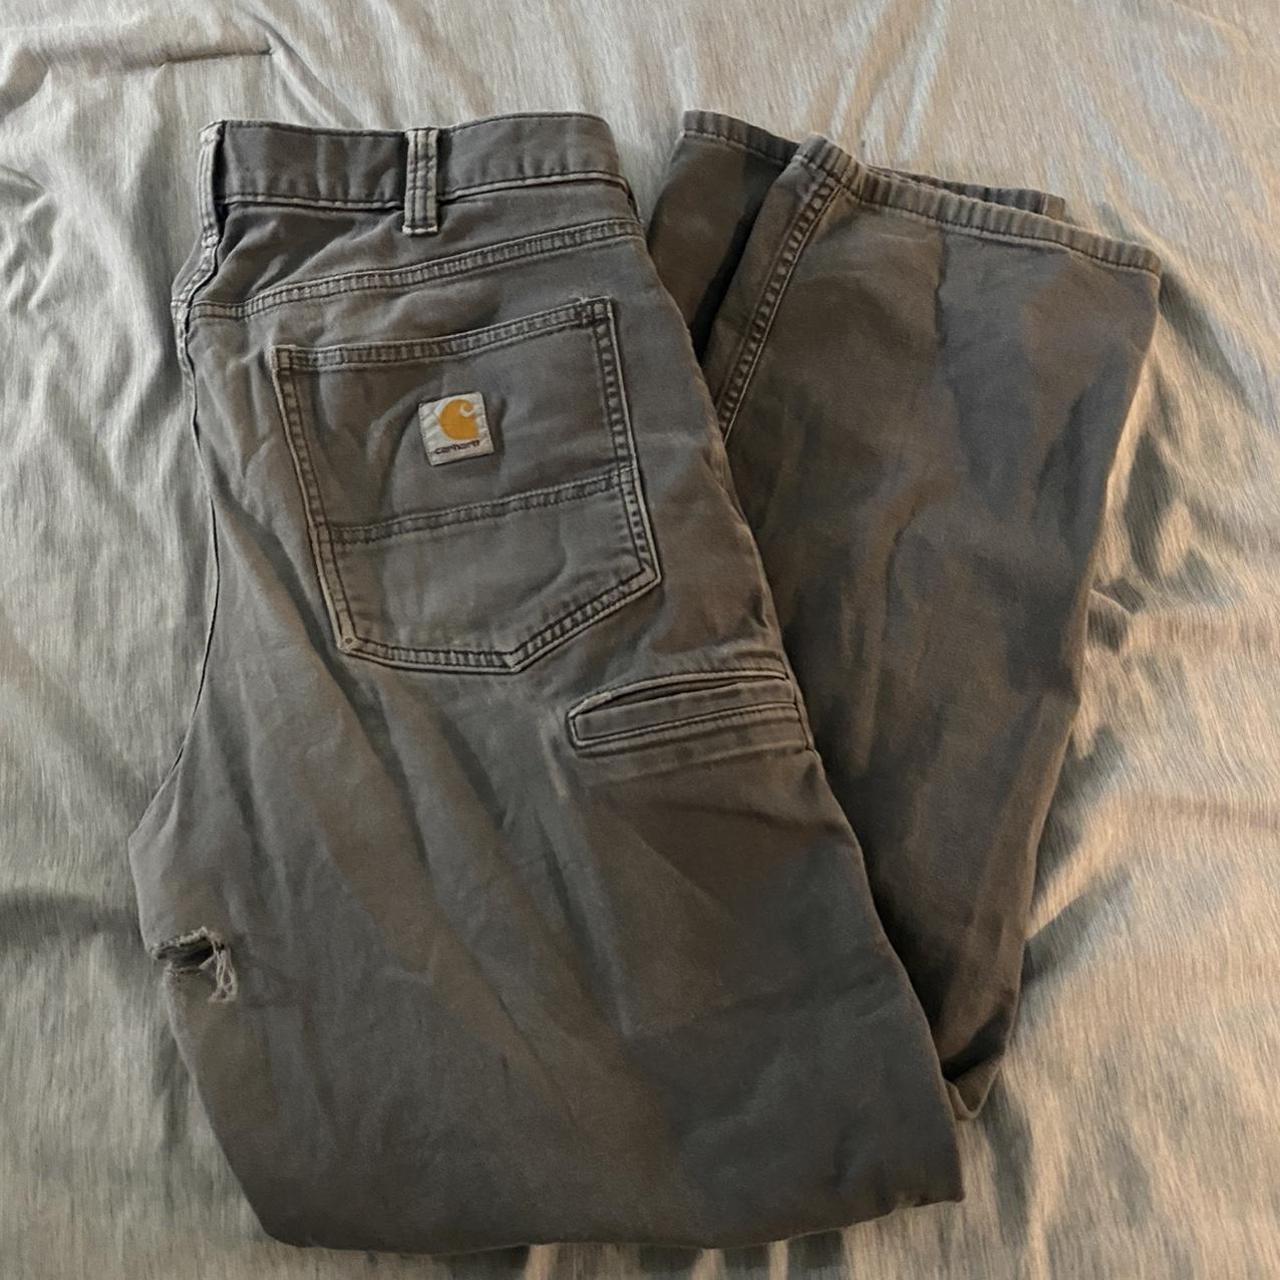 Grey Carhartt Pants 👖 Size 35/34 Cleaned and Washed... - Depop